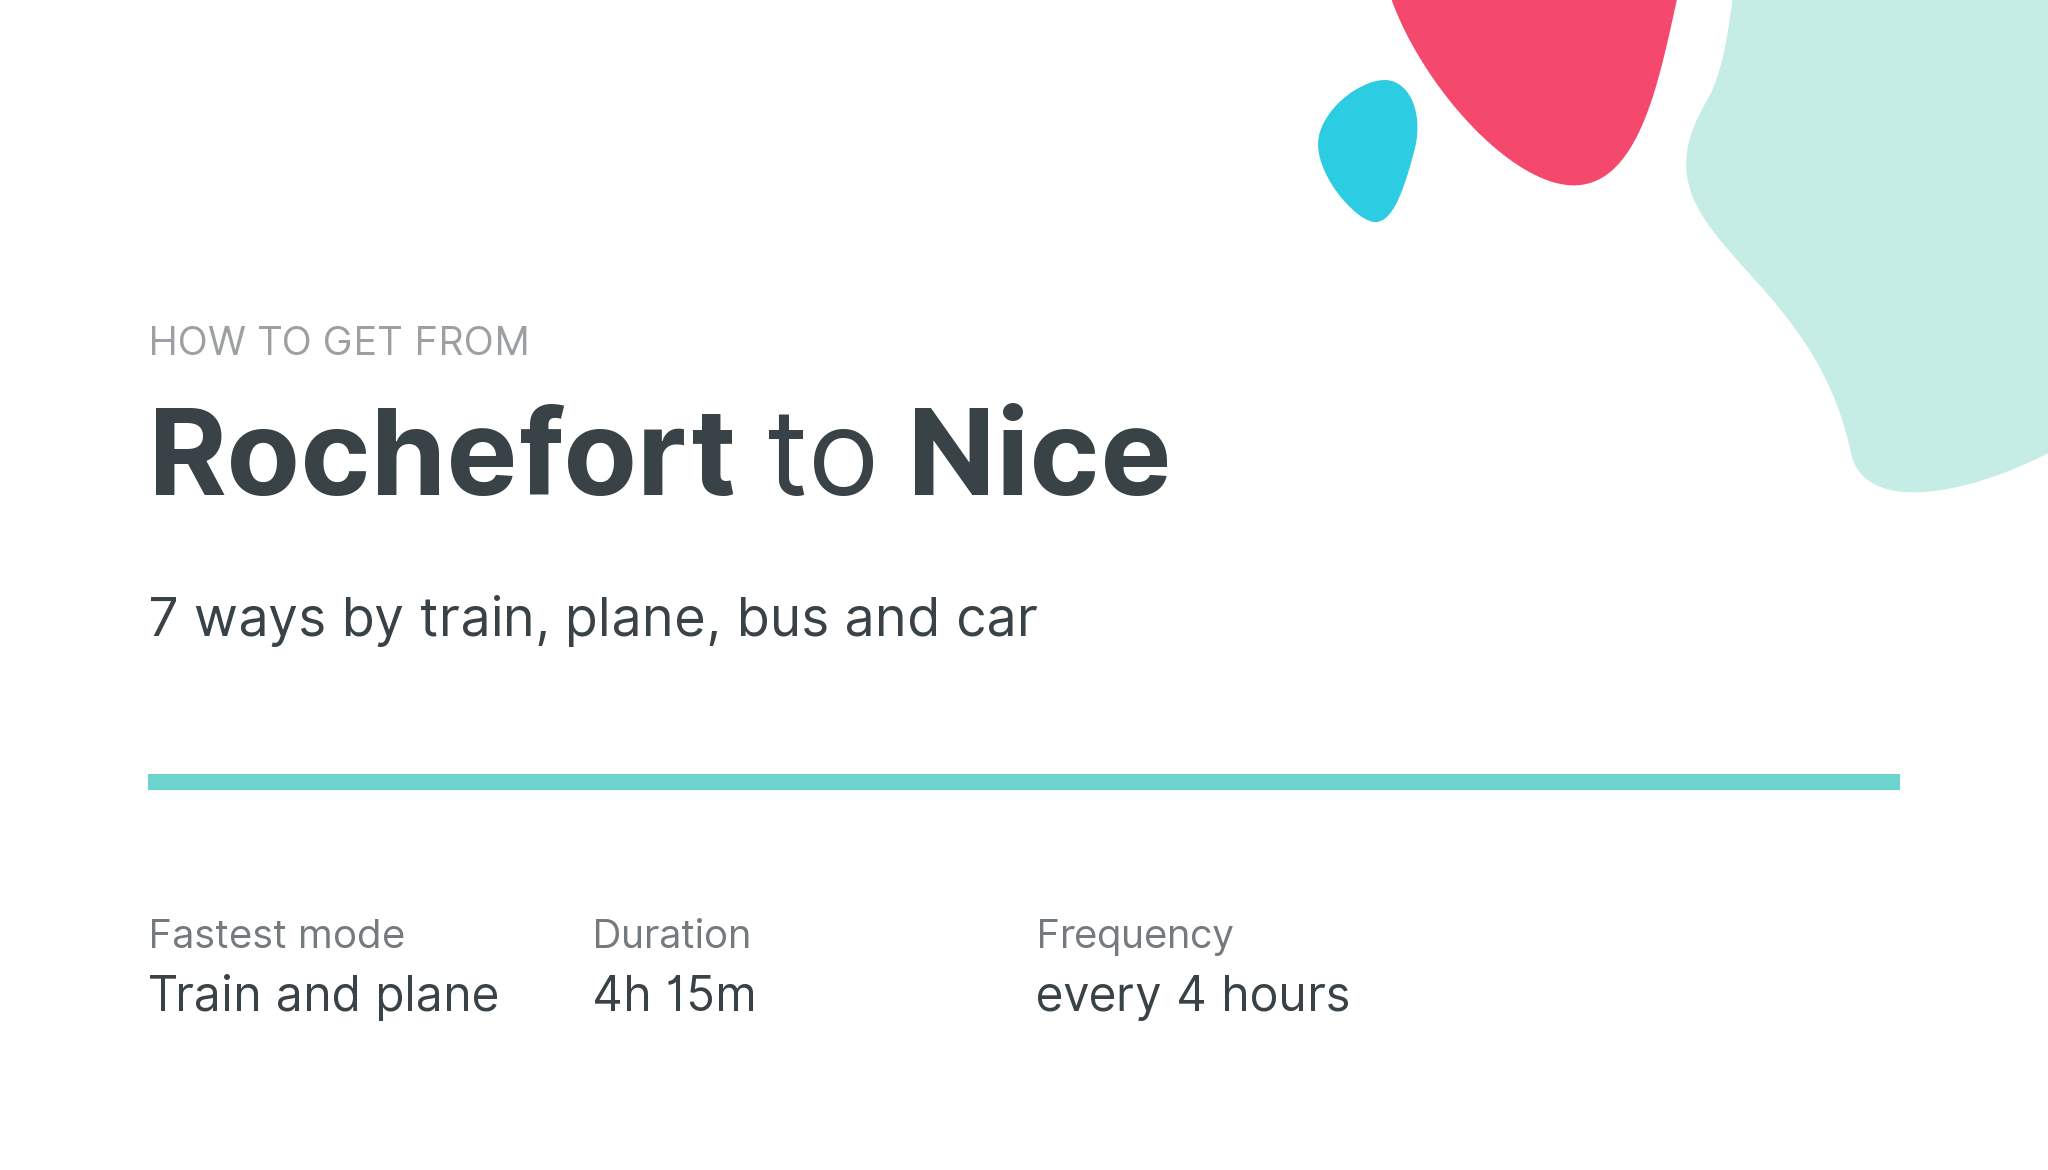 How do I get from Rochefort to Nice